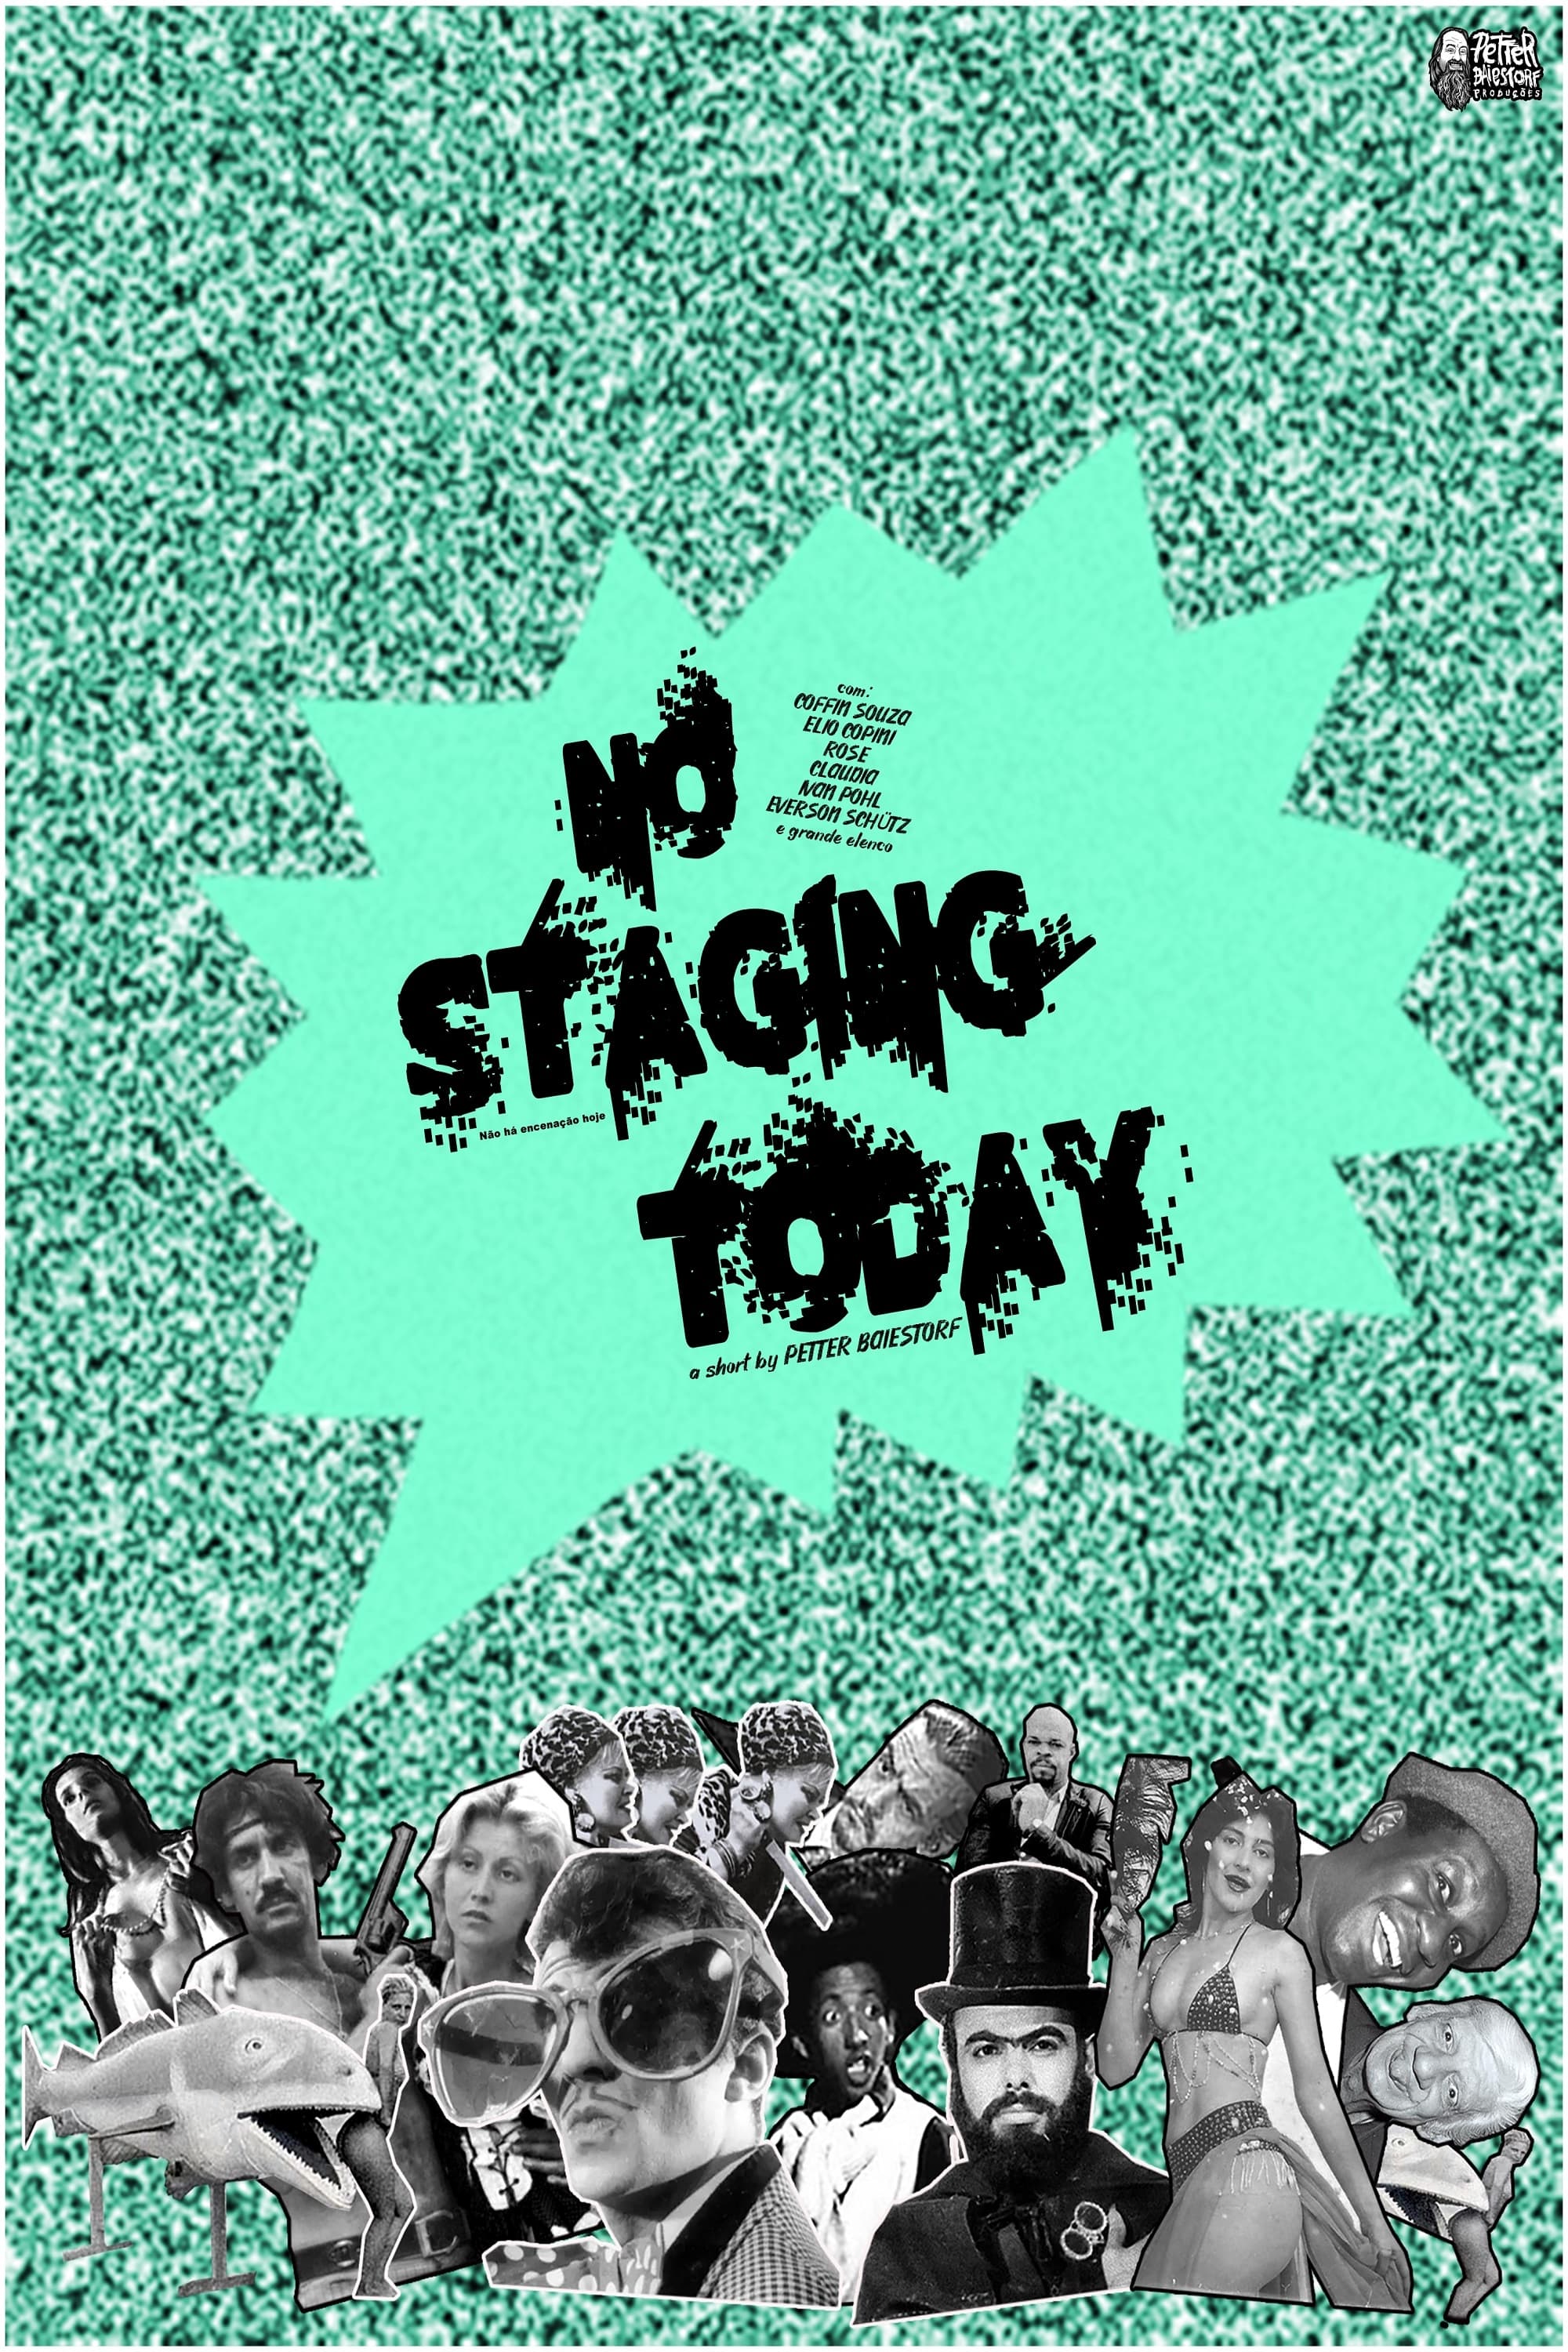 No Staging Today!